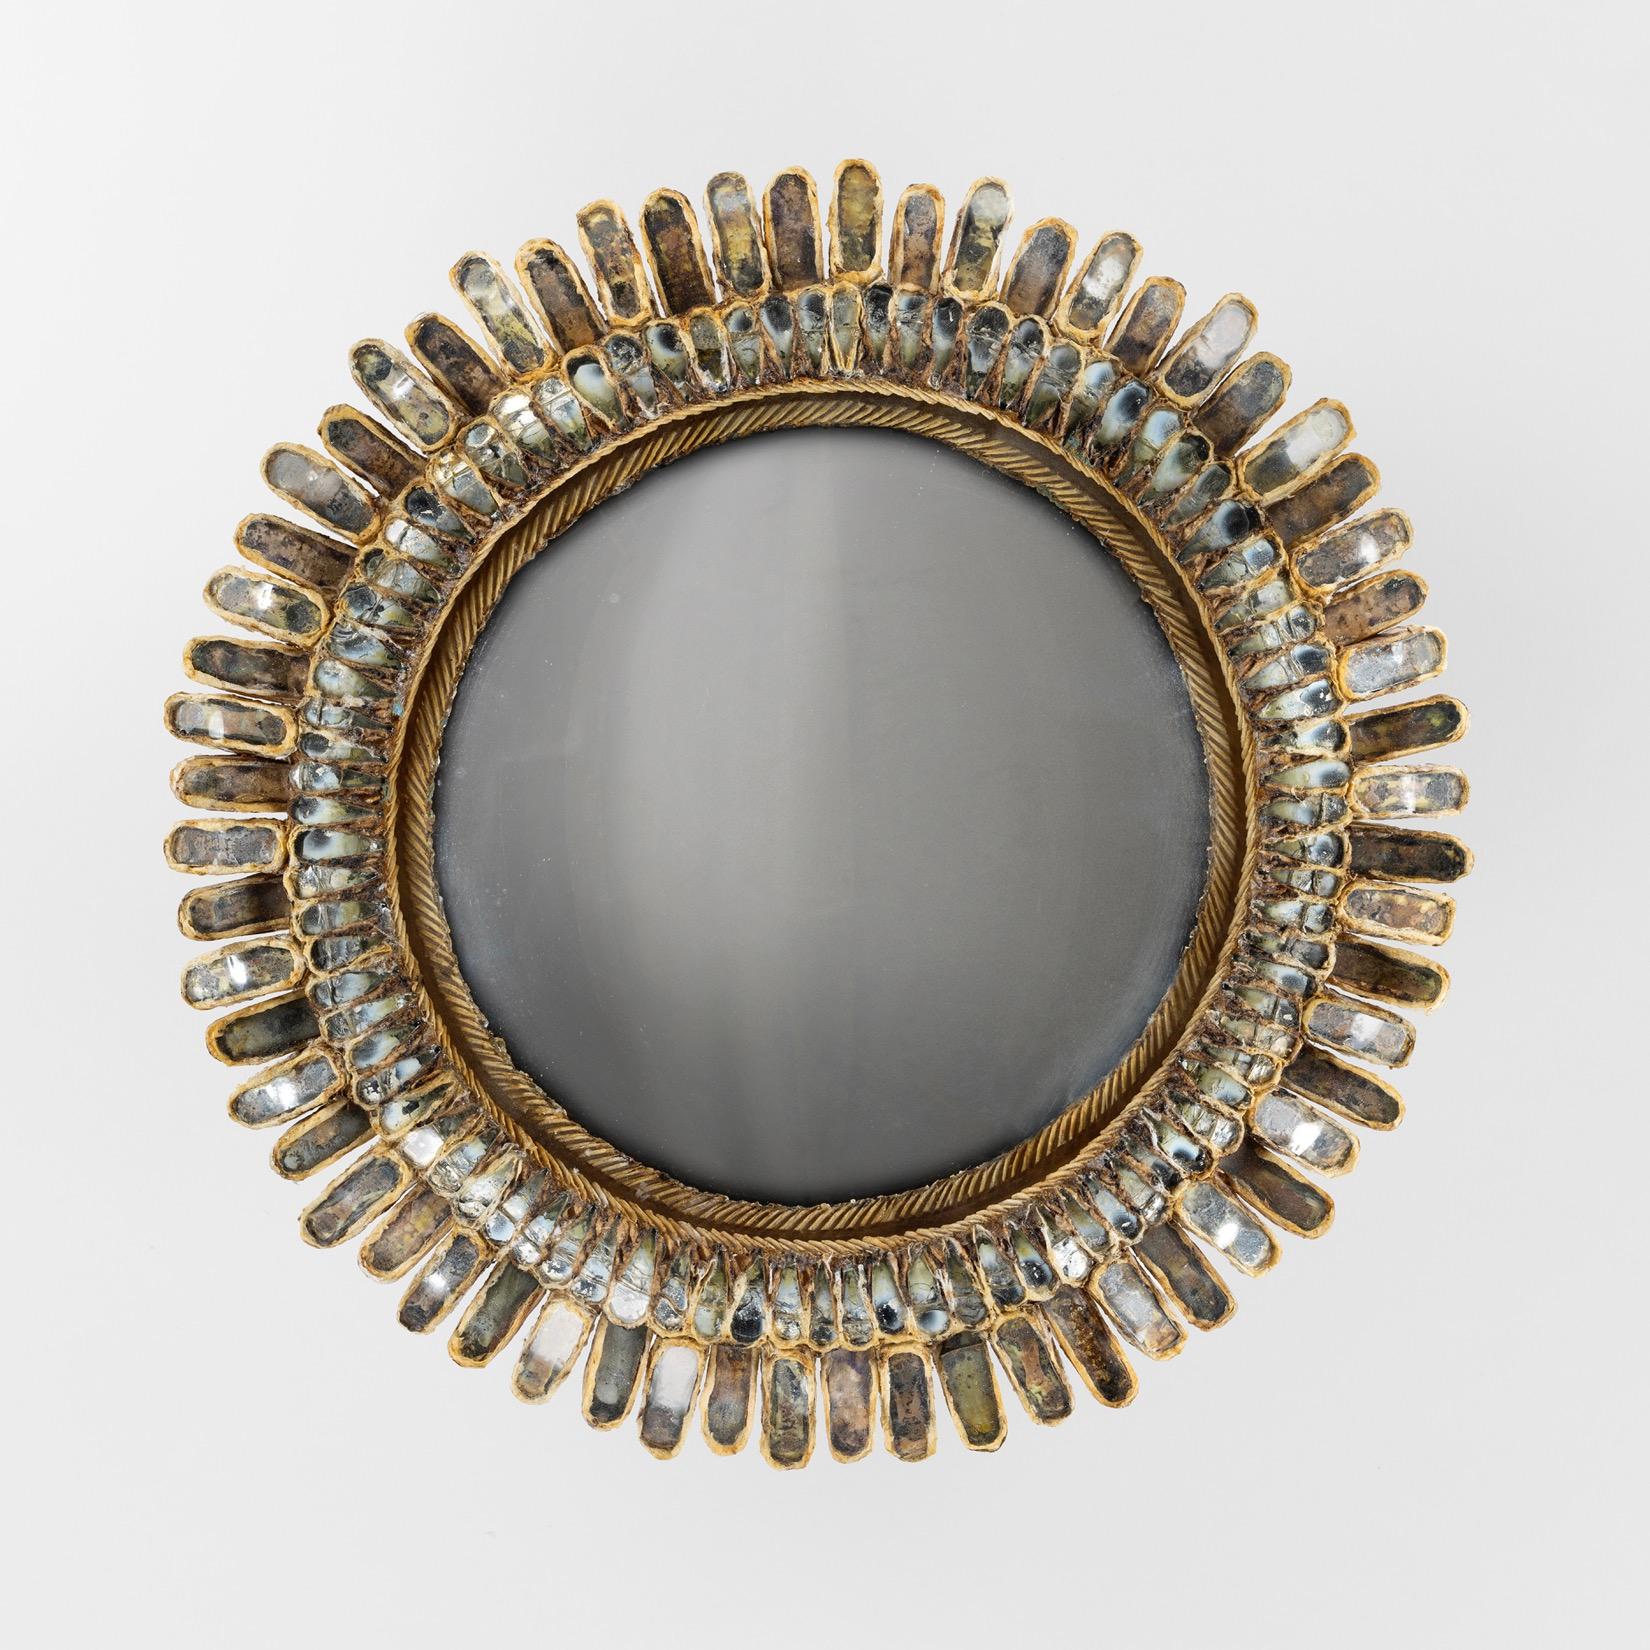 Line Vautrin was inspired by the daisy flower (Marguerite in French) to imagine this elegant mirror made up of a row of 60 petals shaped alternately forwards and backwards.
The central convex witch is surrounded by a wide ring lined with